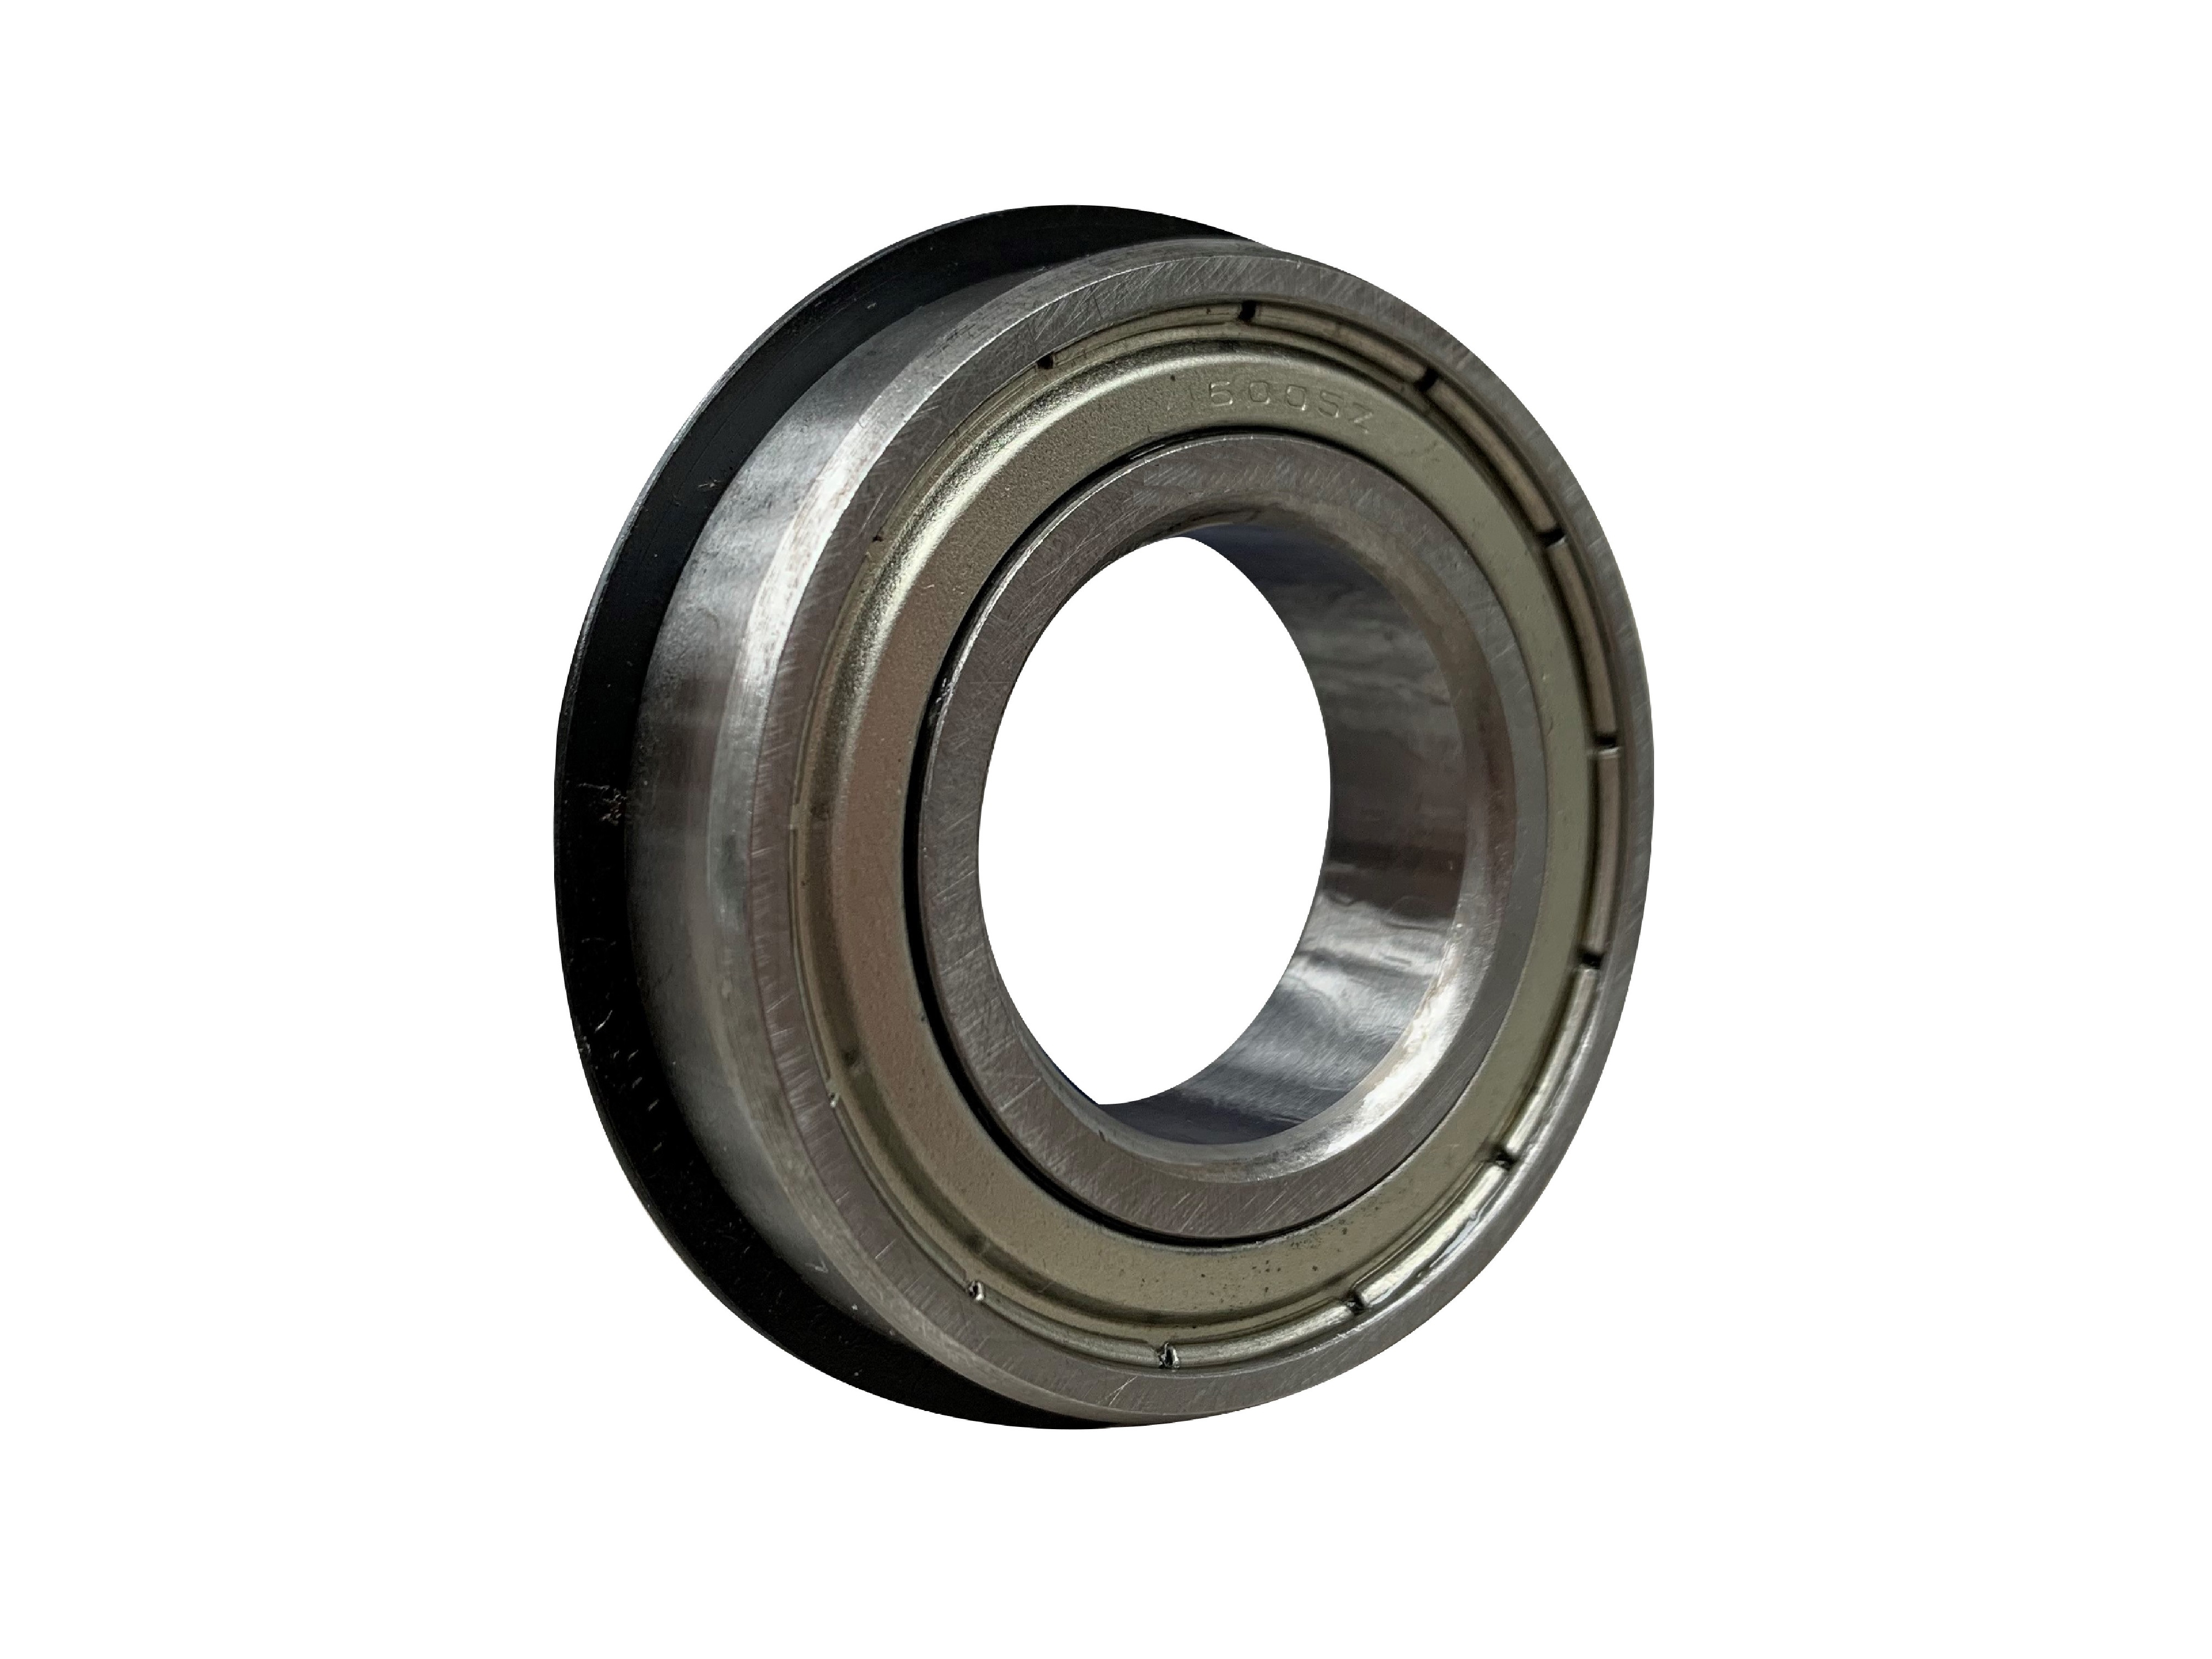 SKF 6304-2ZNR Shielded Ball Bearing With Snap Ring 20mm x 52mm x 15mm